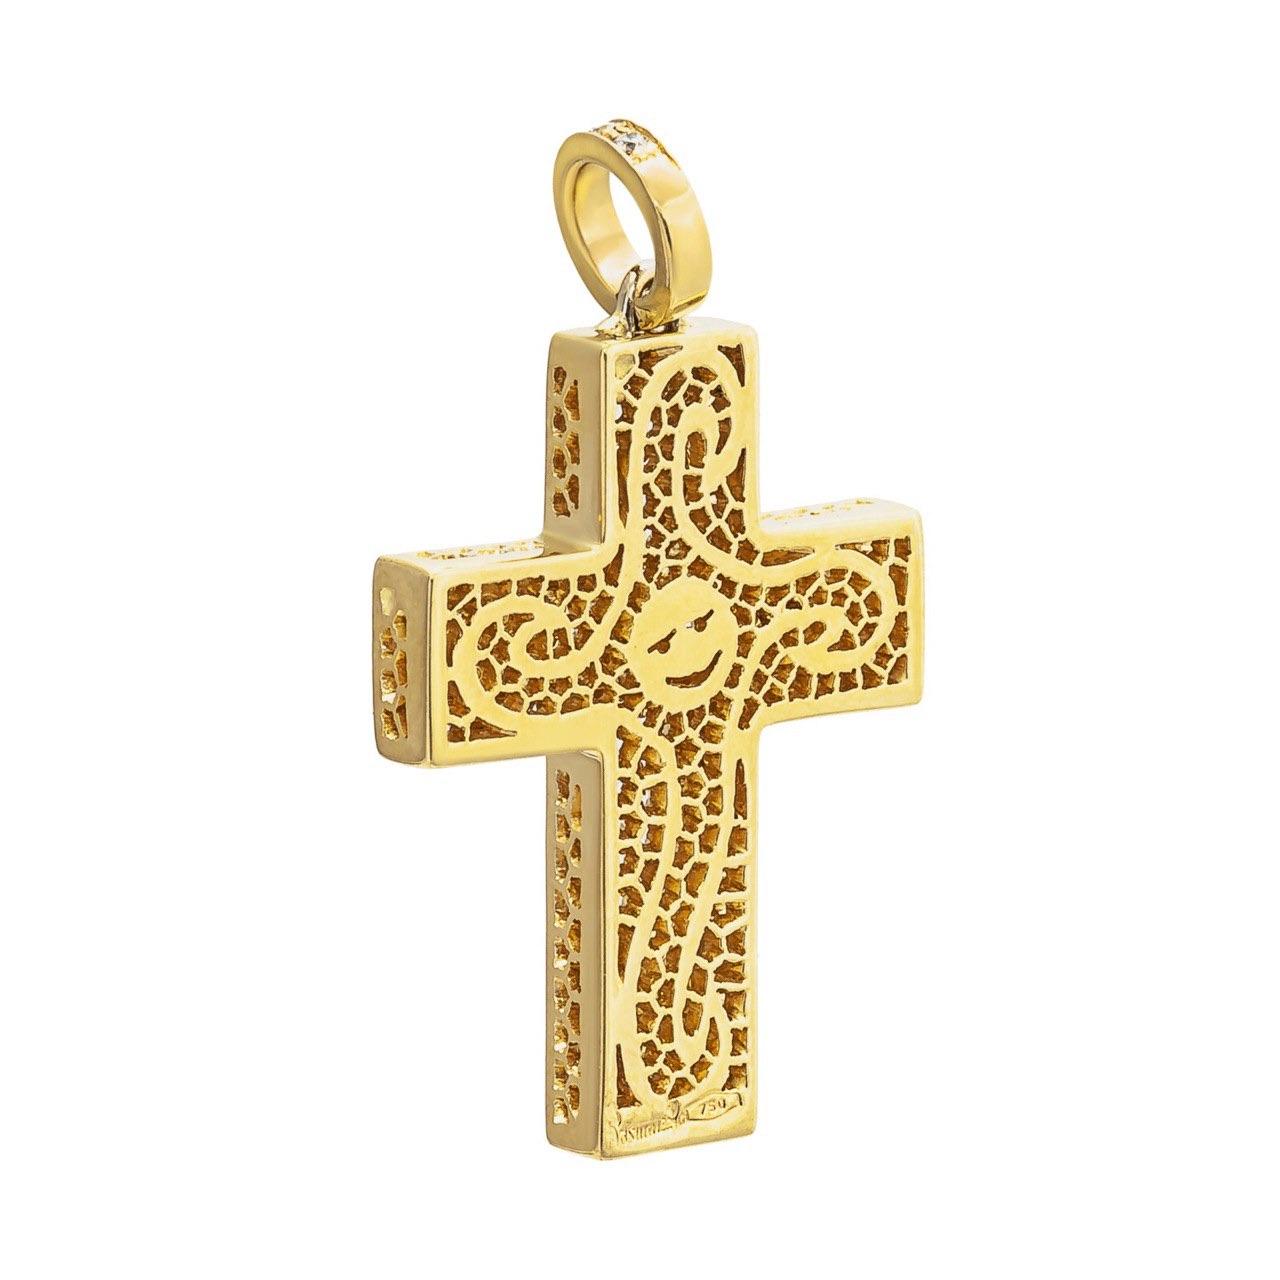 Cross in 18 kt yellow gold and central diamond of approx. 0.62 ct. D-F color, VVs-Vs clarity and very good cut.

The cross is a symbol that accompanies us every day. This creation is finished with Maestro Rosmundo's honeycomb technique. High-end